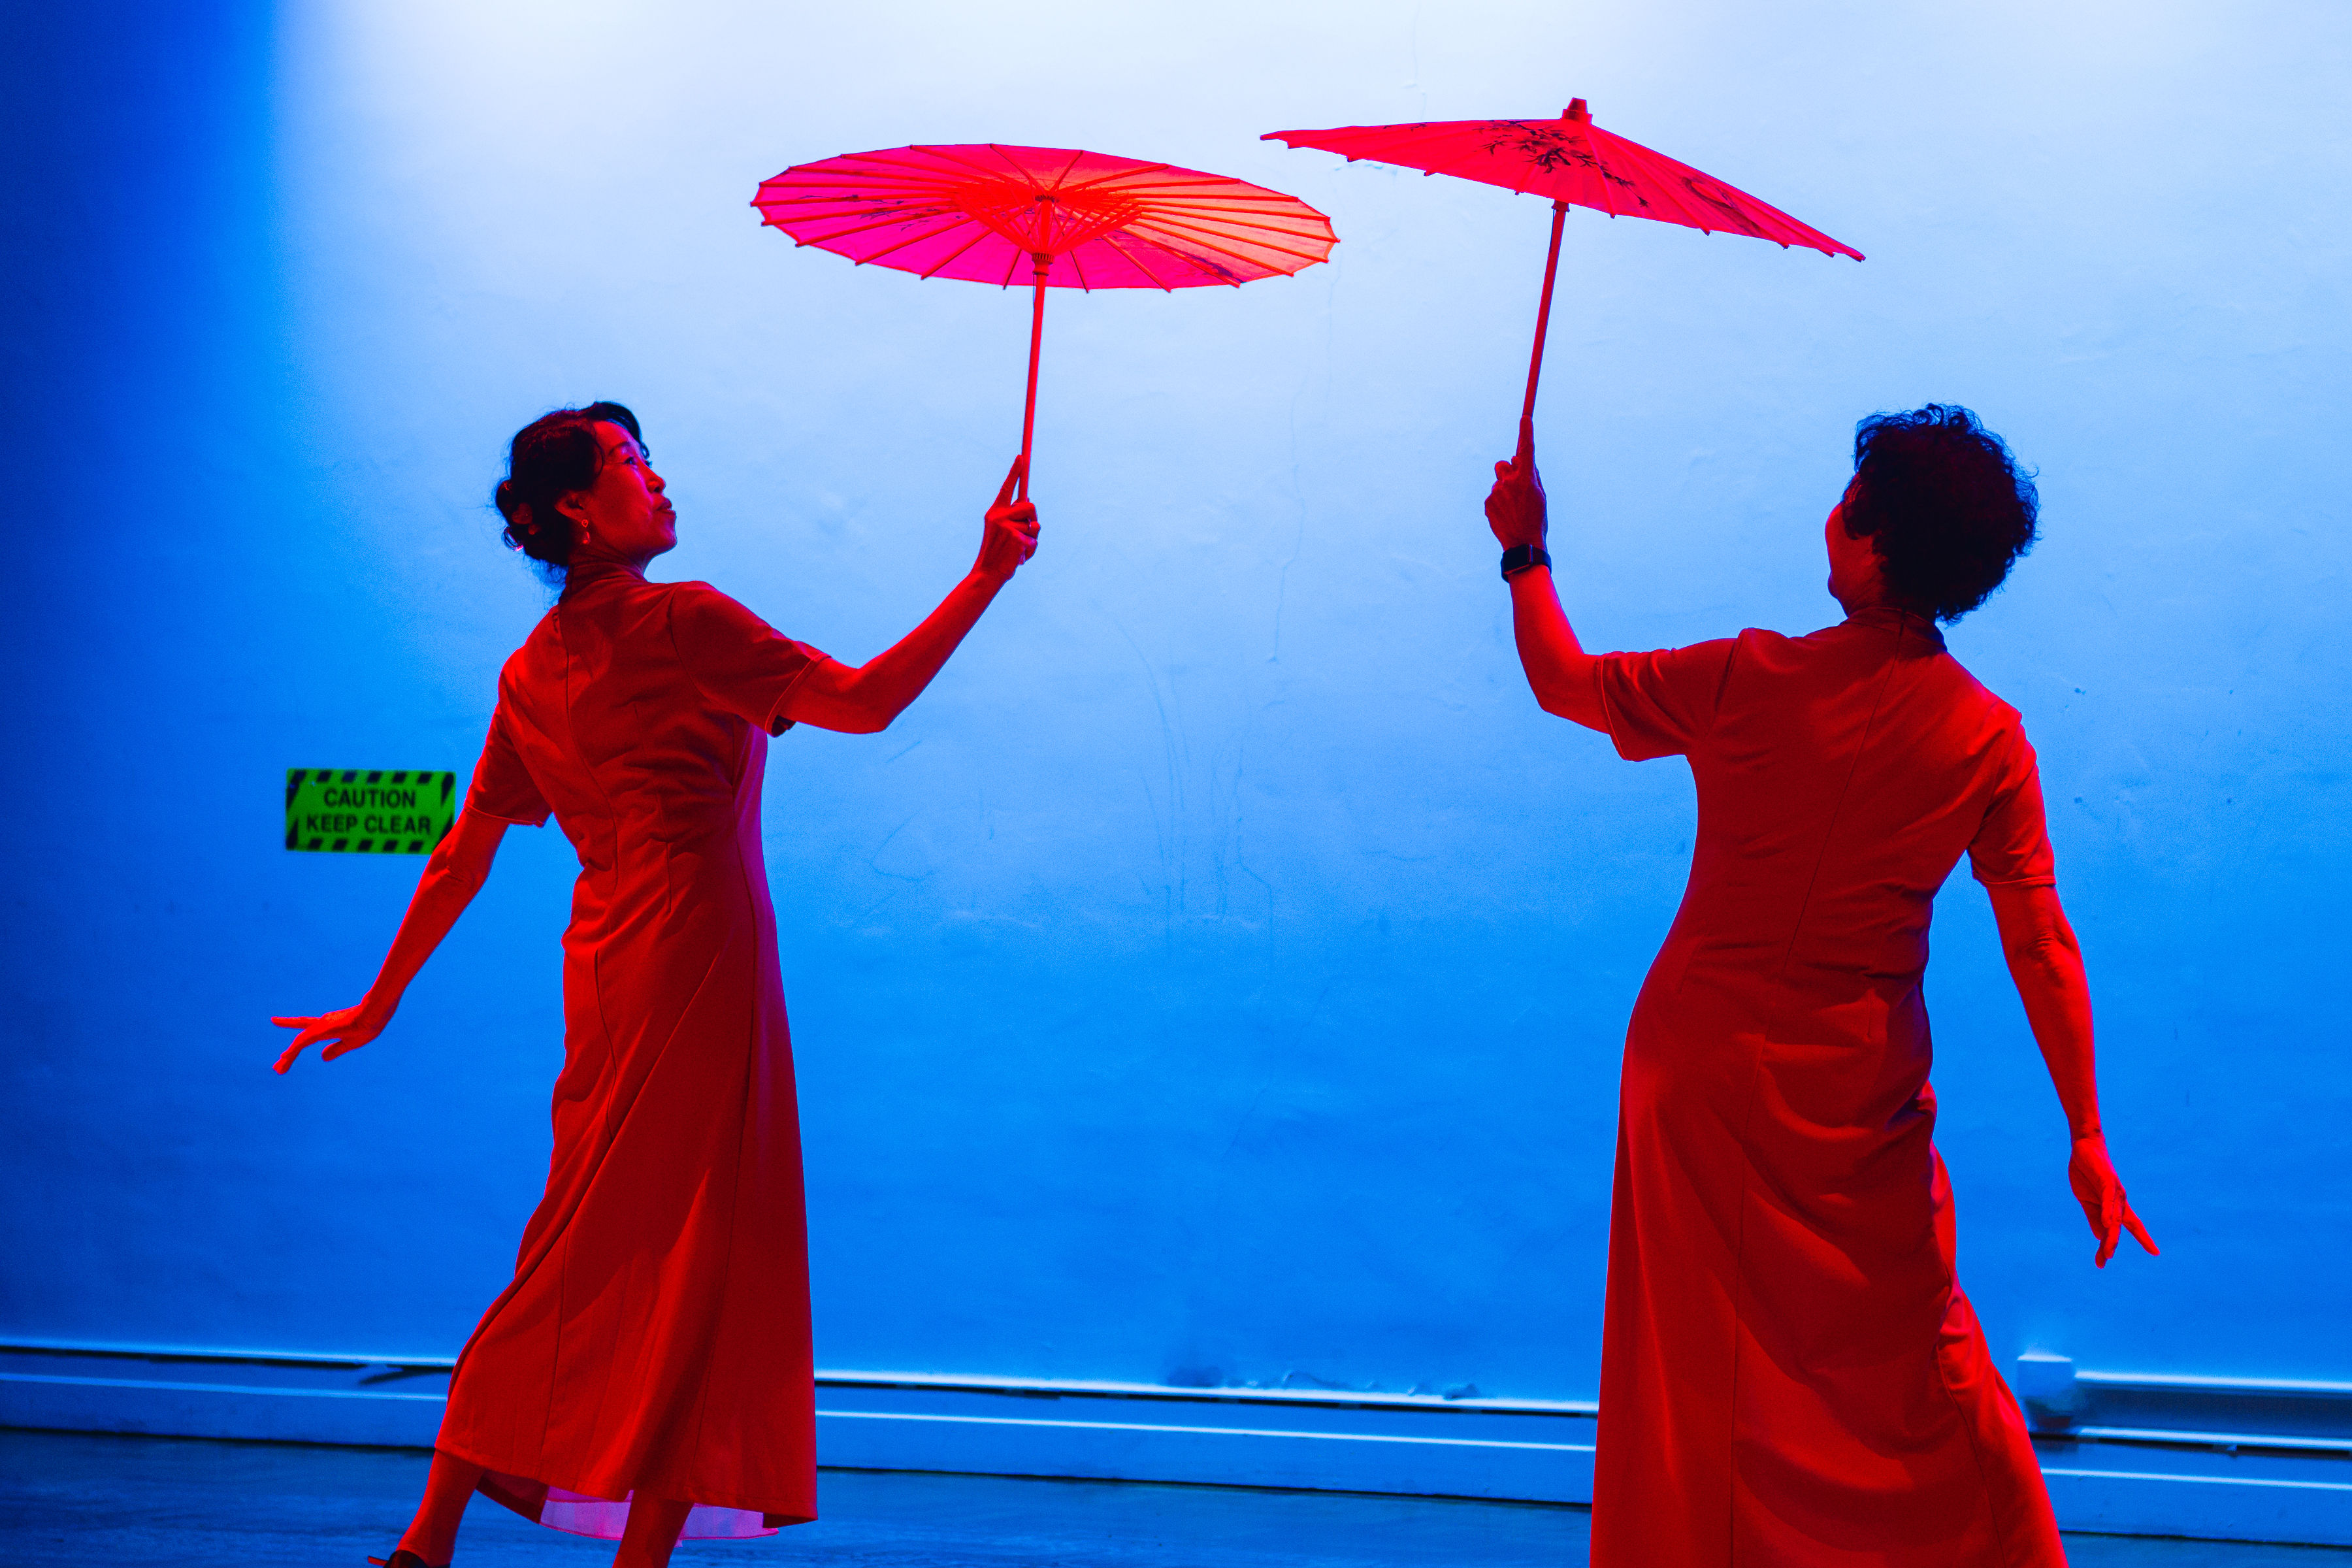 Women in red holding red parasols